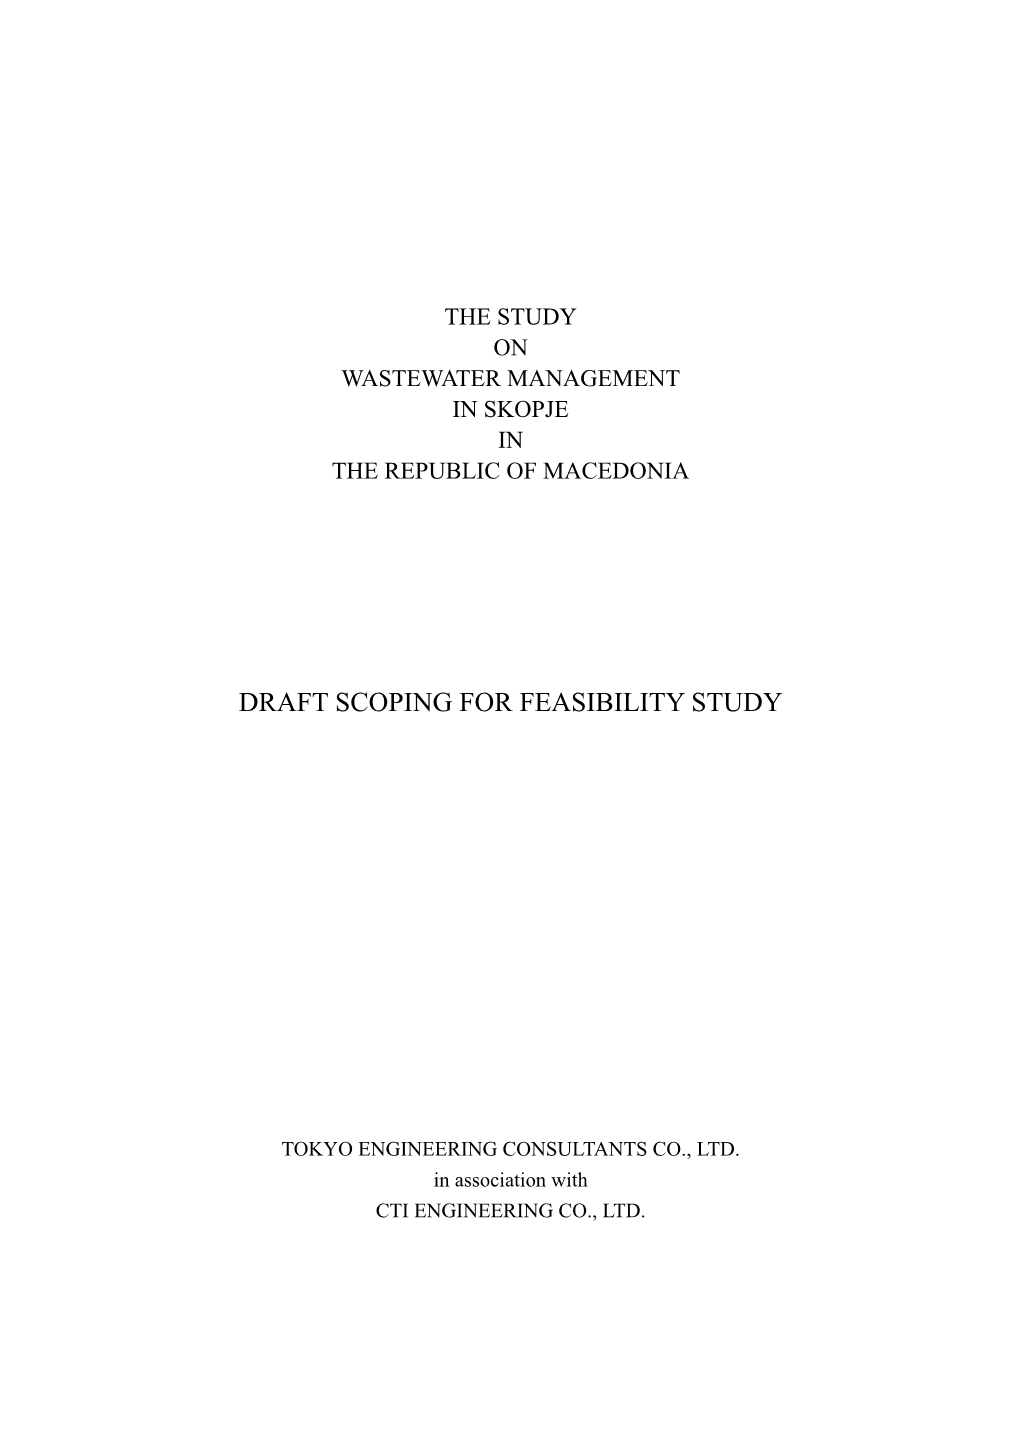 Draft Scoping for Feasibility Study